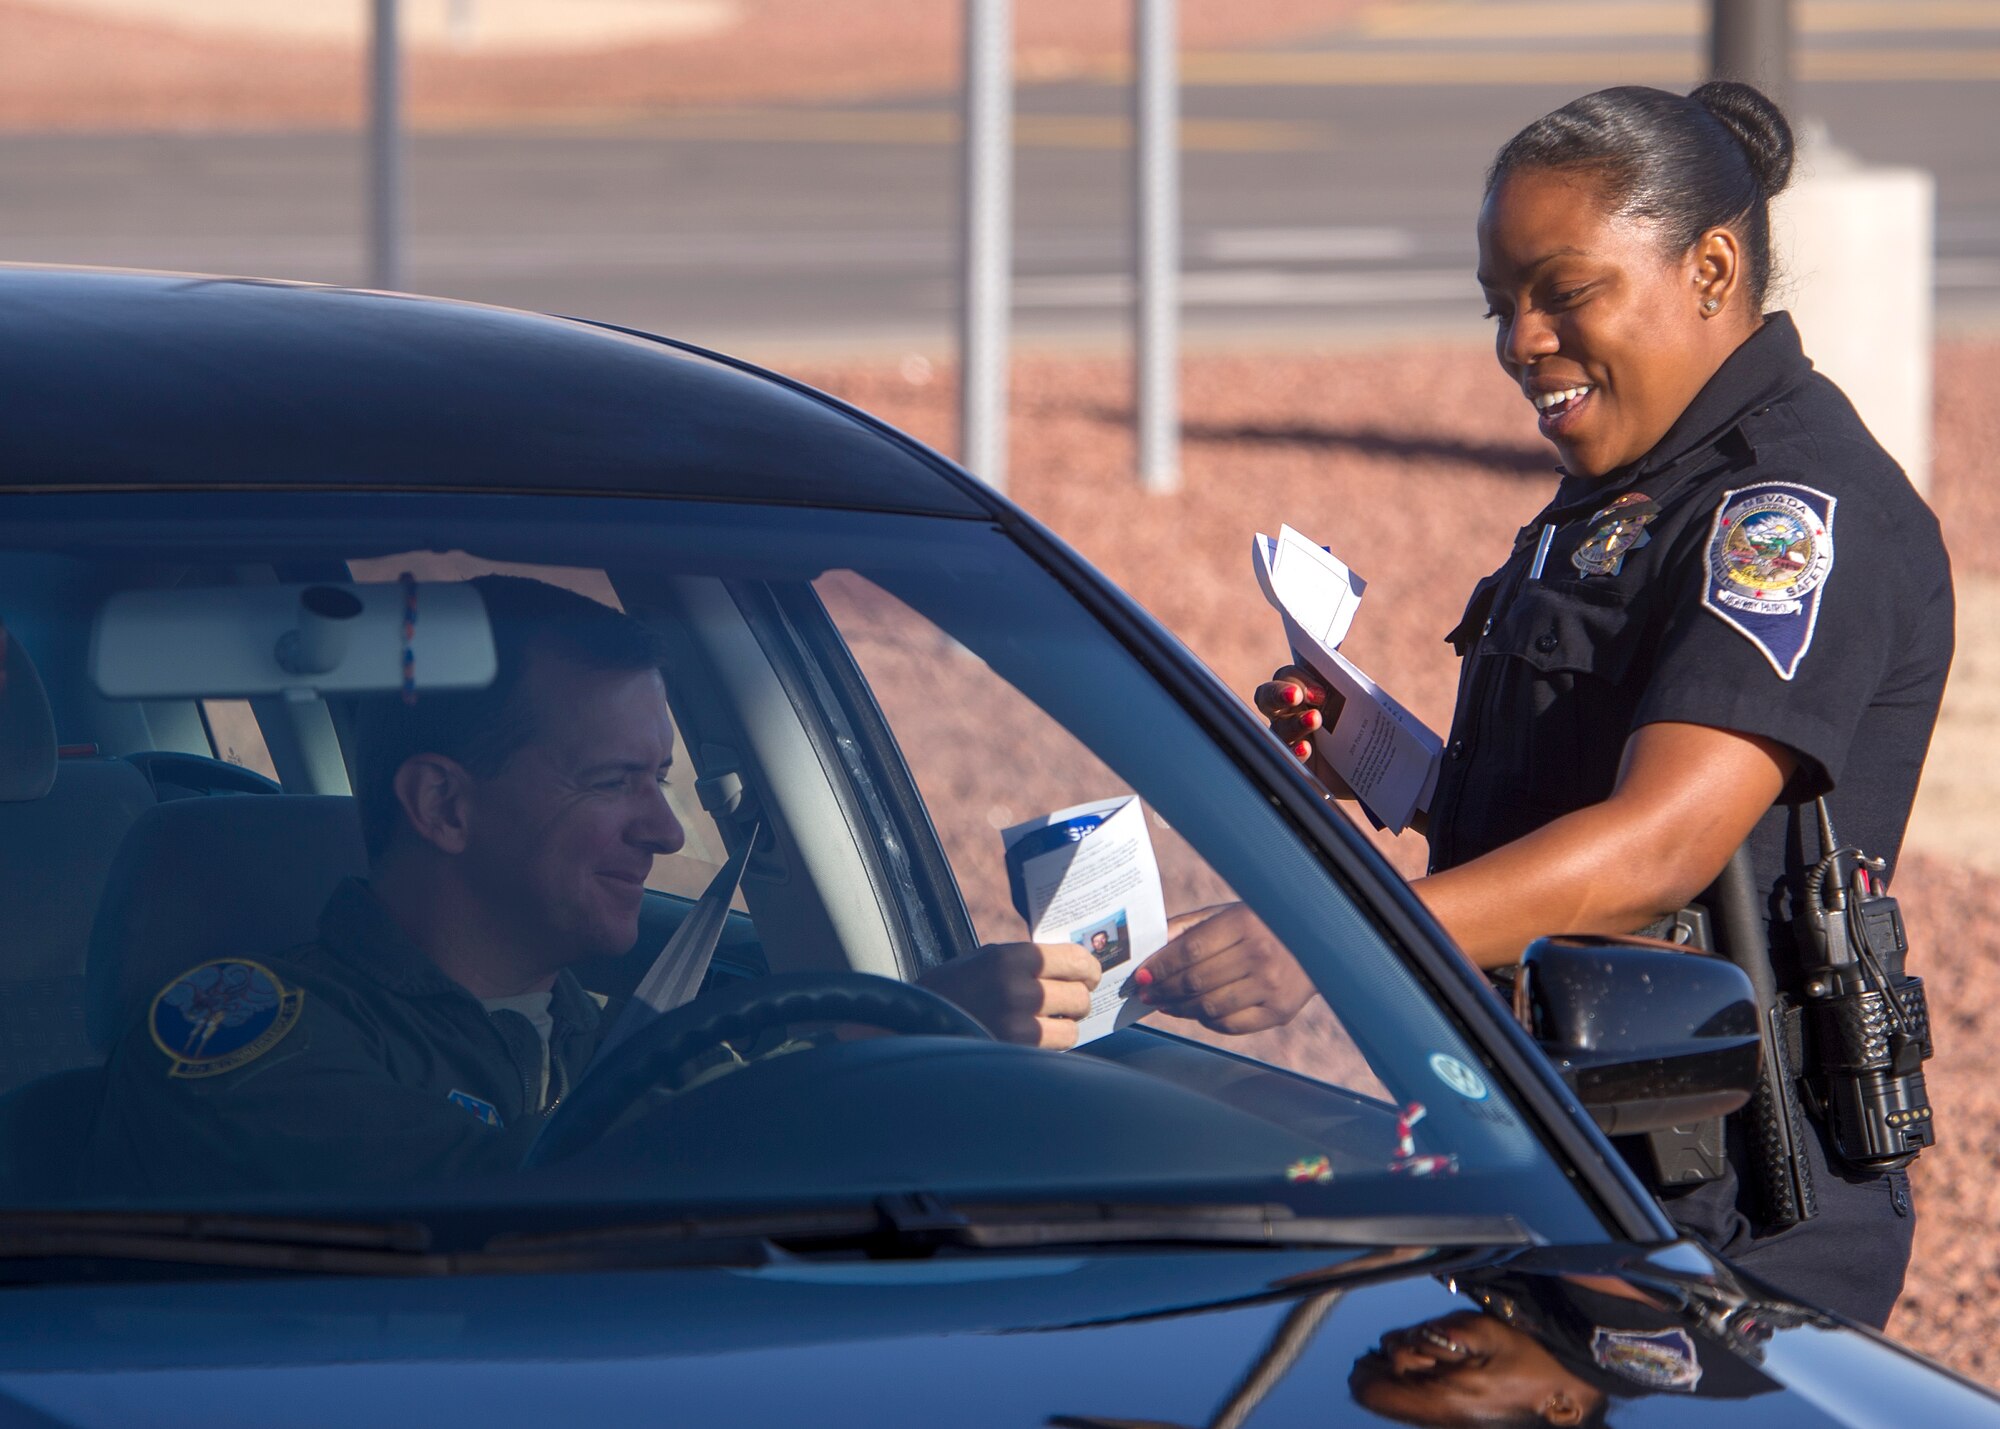 Nevada highway patrol officer Jineal Jack hands a Police Week flyer to an Airman passing through the gates of Creech Air Force Base, Nev., on May 12, 2014. Police Week is a nation-wide event proclaimed by the president of the United States during the week of May 15 each year to recognize all law enforcement officers who have paid the ultimate sacrifice. (U.S. Air Force photo by; Airman 1st Class C.C./Released)